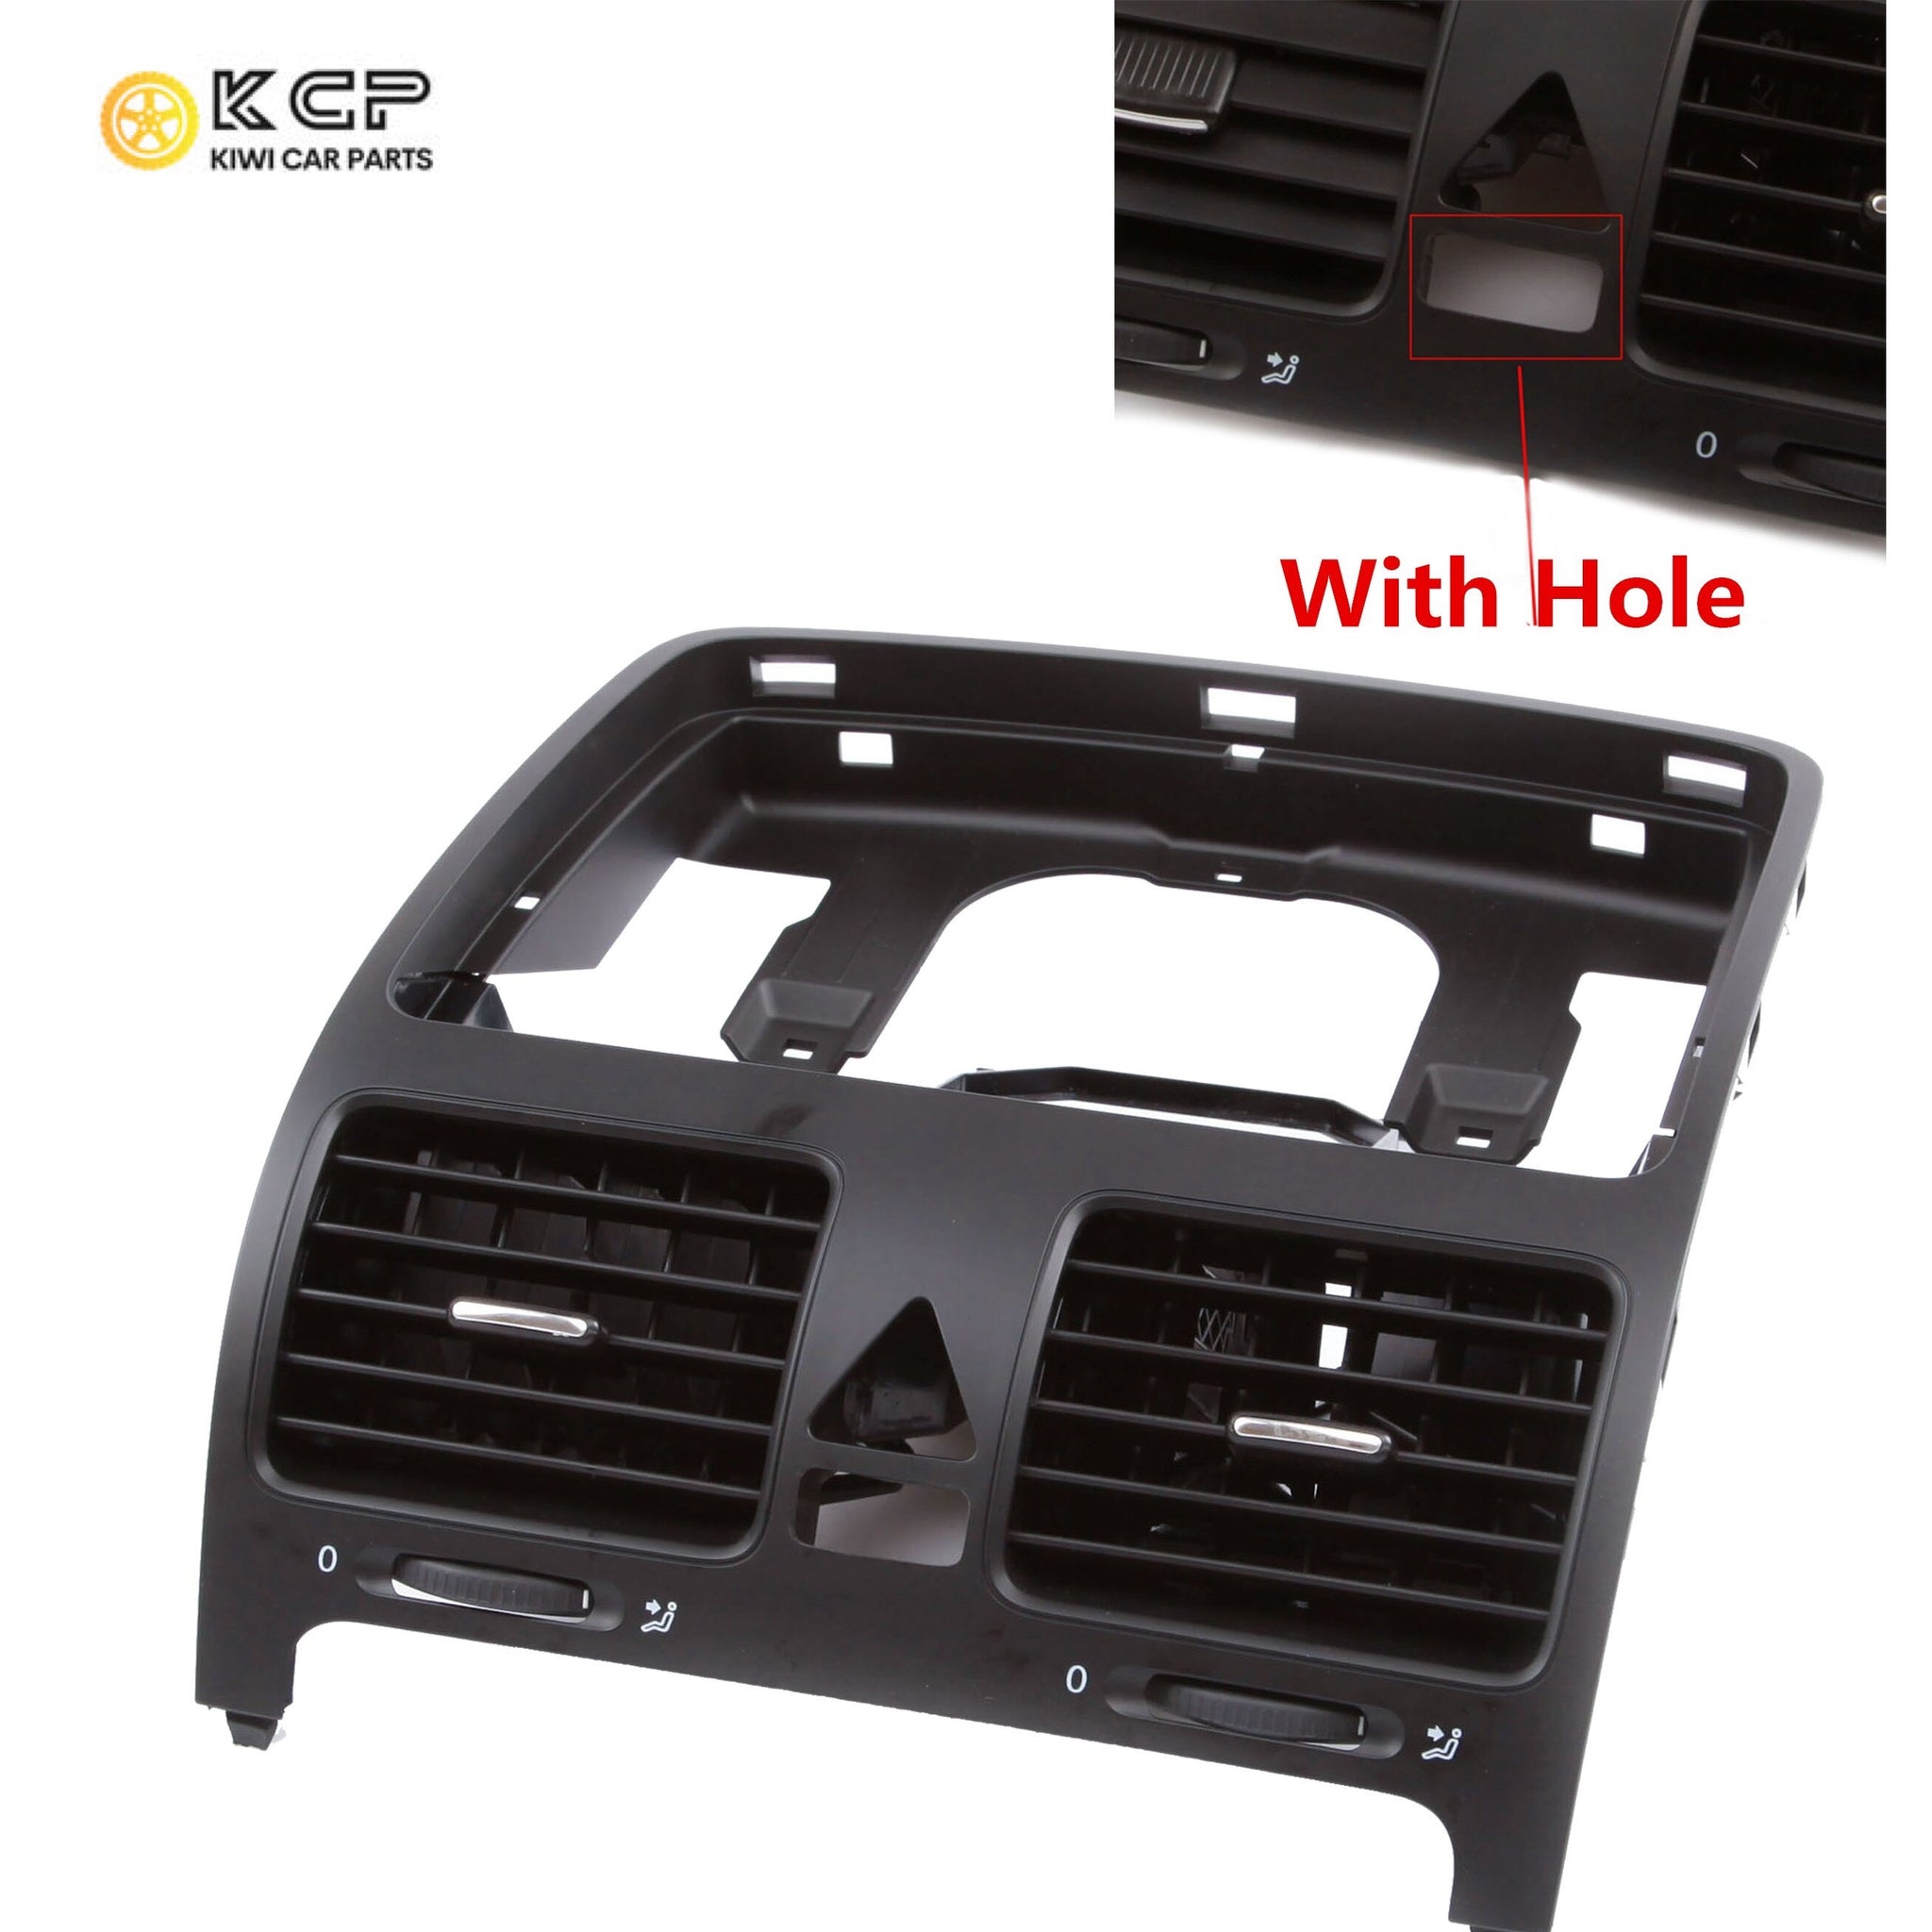 1K0 819 728 E Dash Board Central Air Outlet Vent With Hole Suitable For VW Volkswagen Jetta MK5 Golf MK5 Rabbit 1K0819743B 1K0 819 728 H